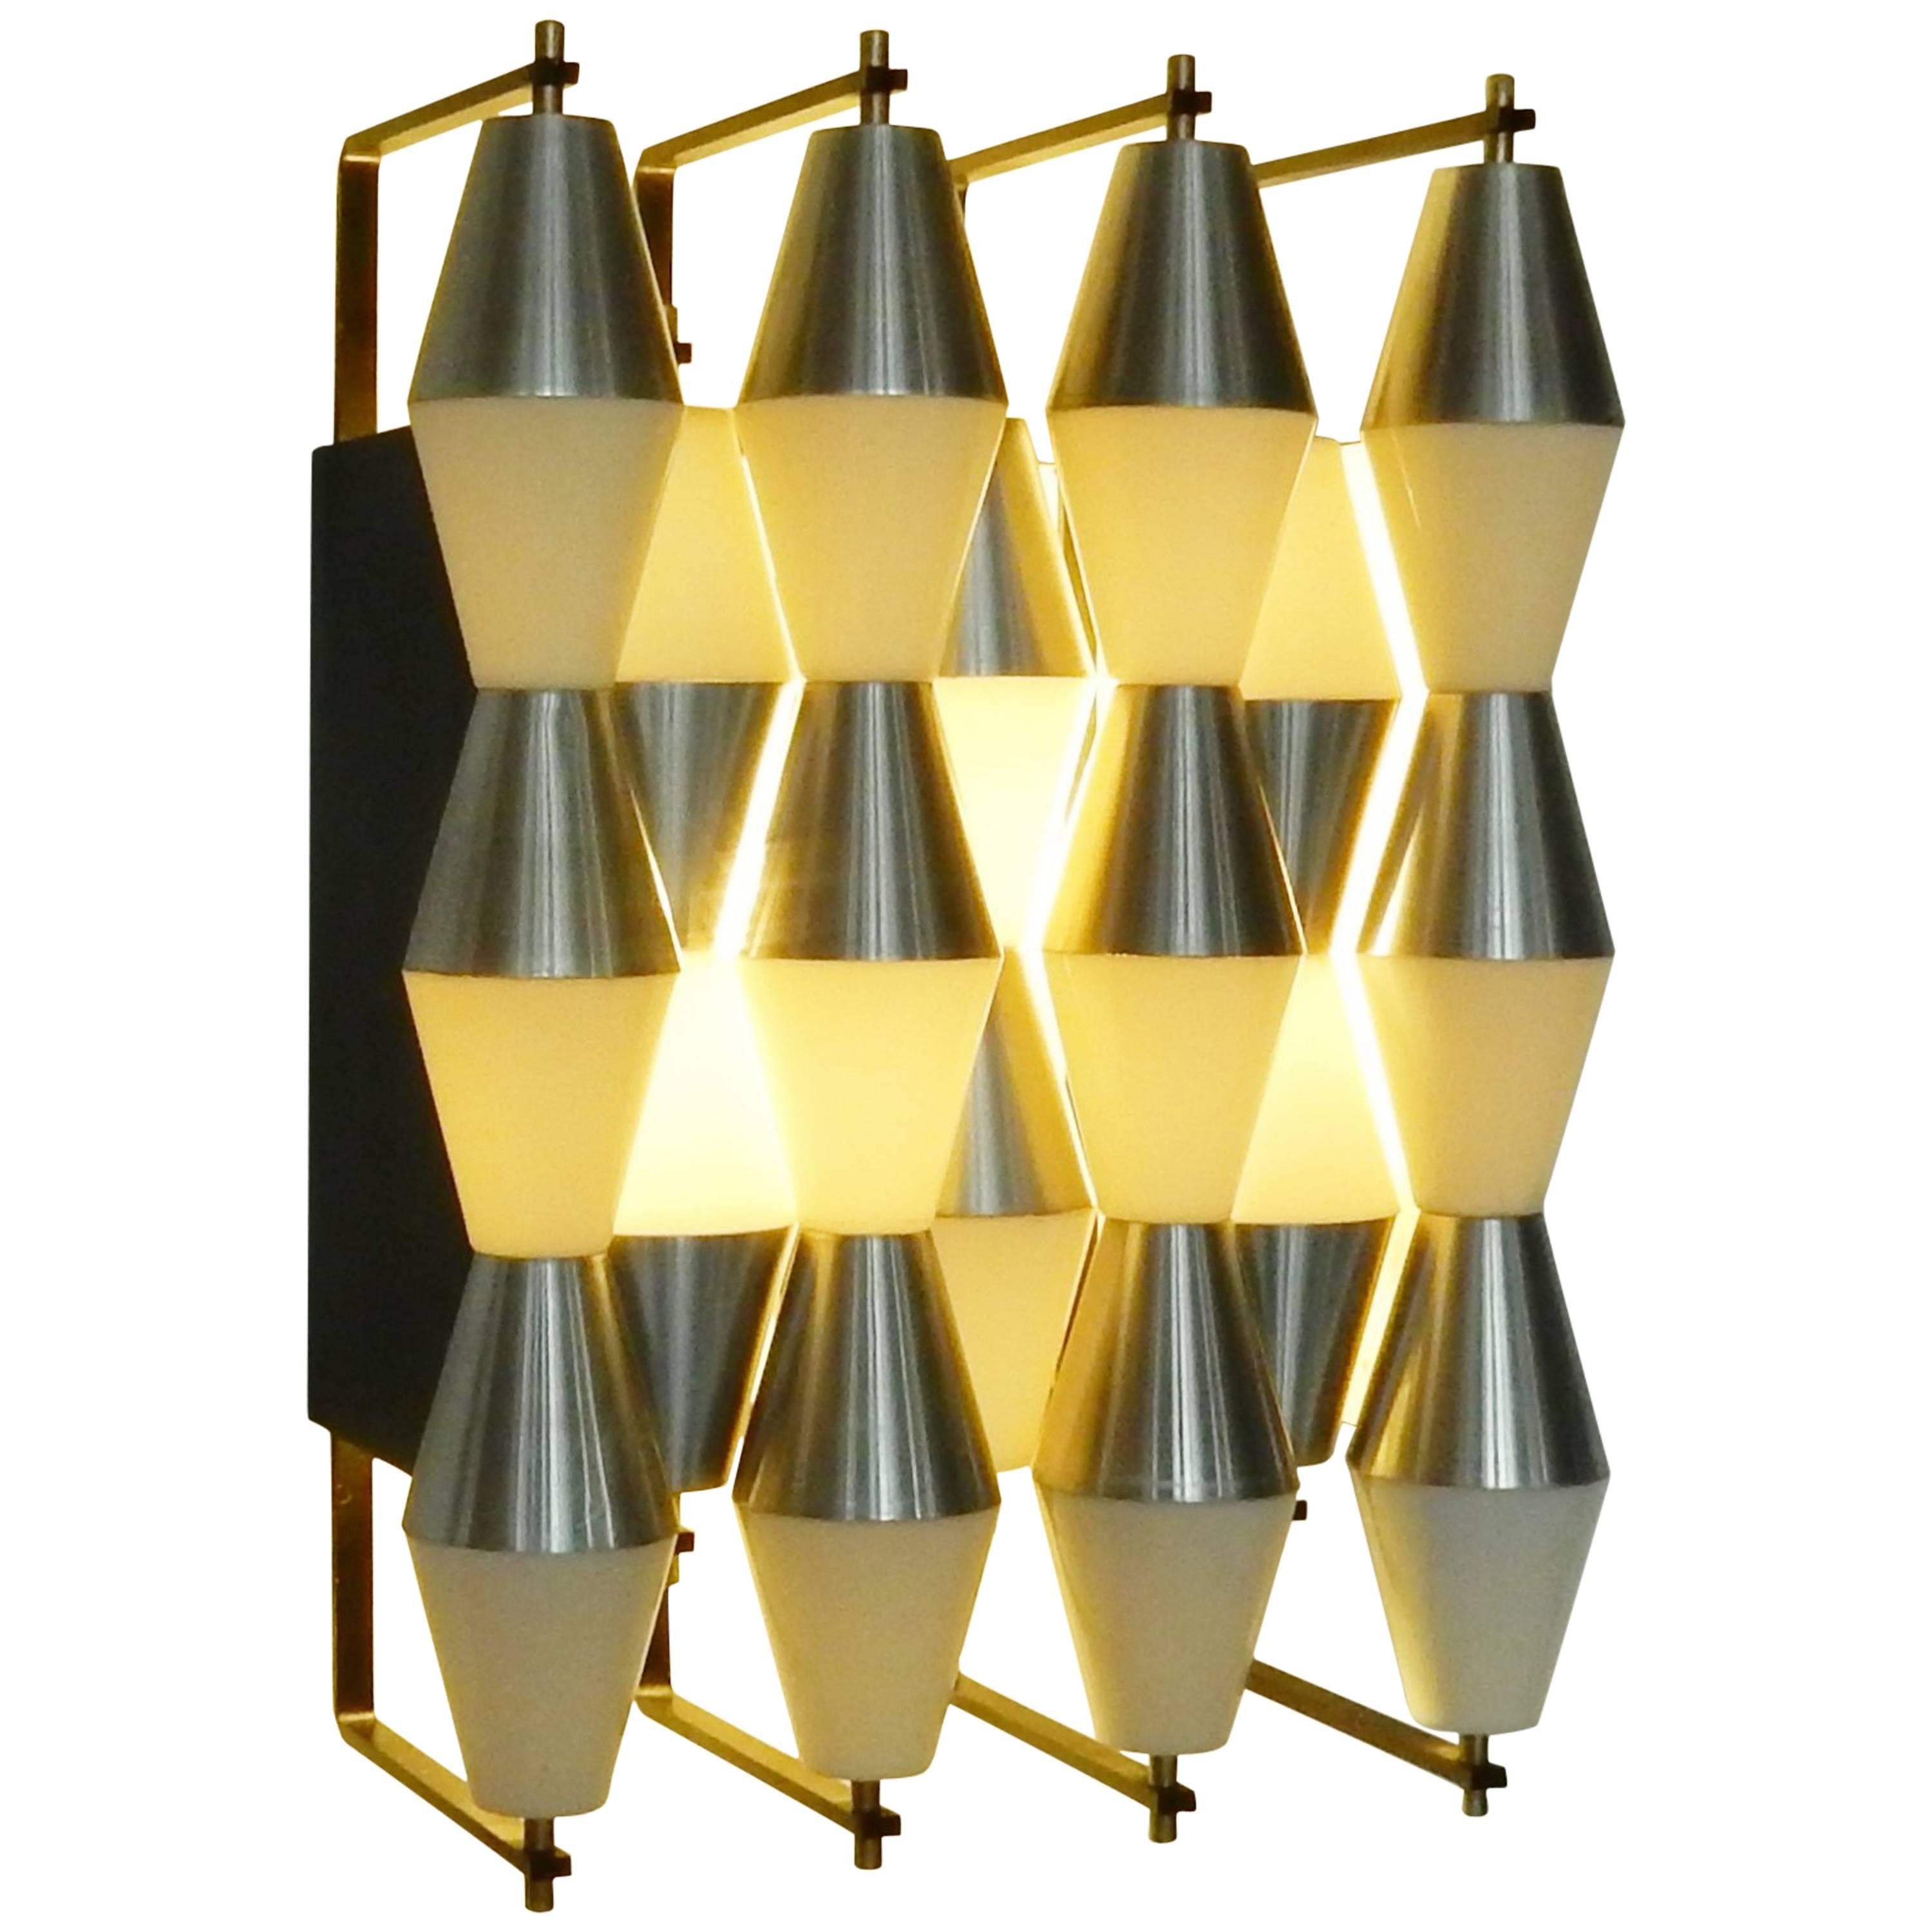 Architectural Wall Light Model "C-1656" by RAAK Amsterdam, Netherlands, 1960s